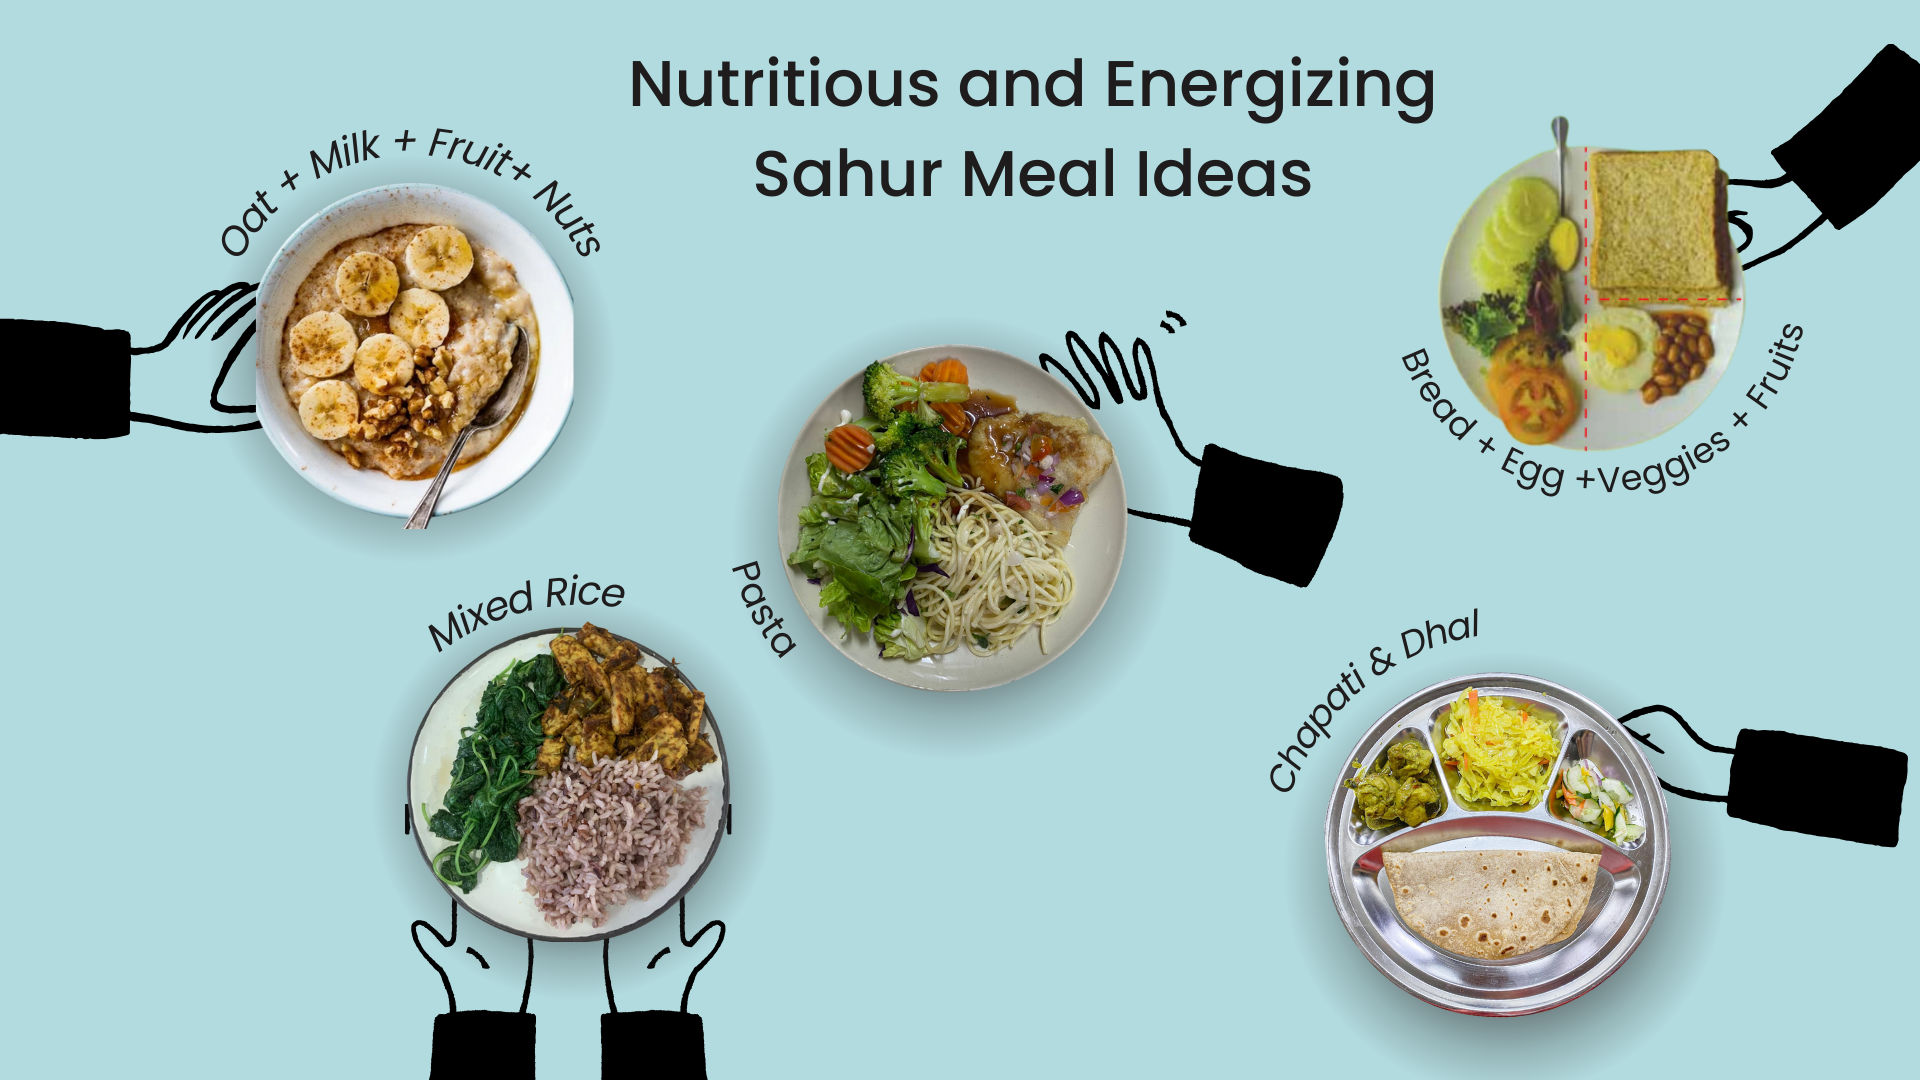 examples of nutritious and energizing sahur meal ideas | BookDoc